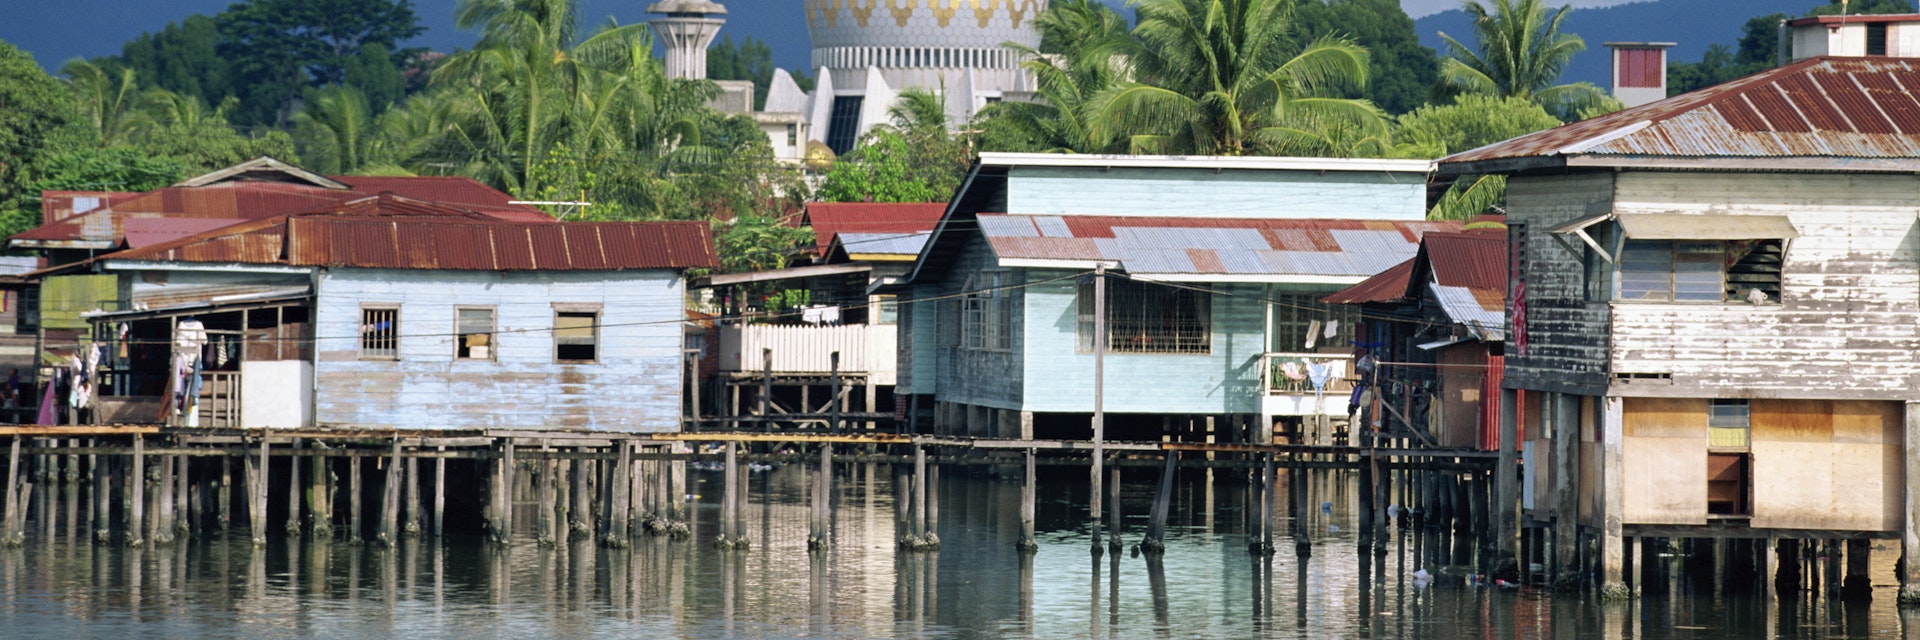 Stilt village and State Mosque in Kota Kinabalu, Asia's fastest growing city and capital of Sabah, northern tip of Borneo, Malaysia, Southeast Asia, Asia